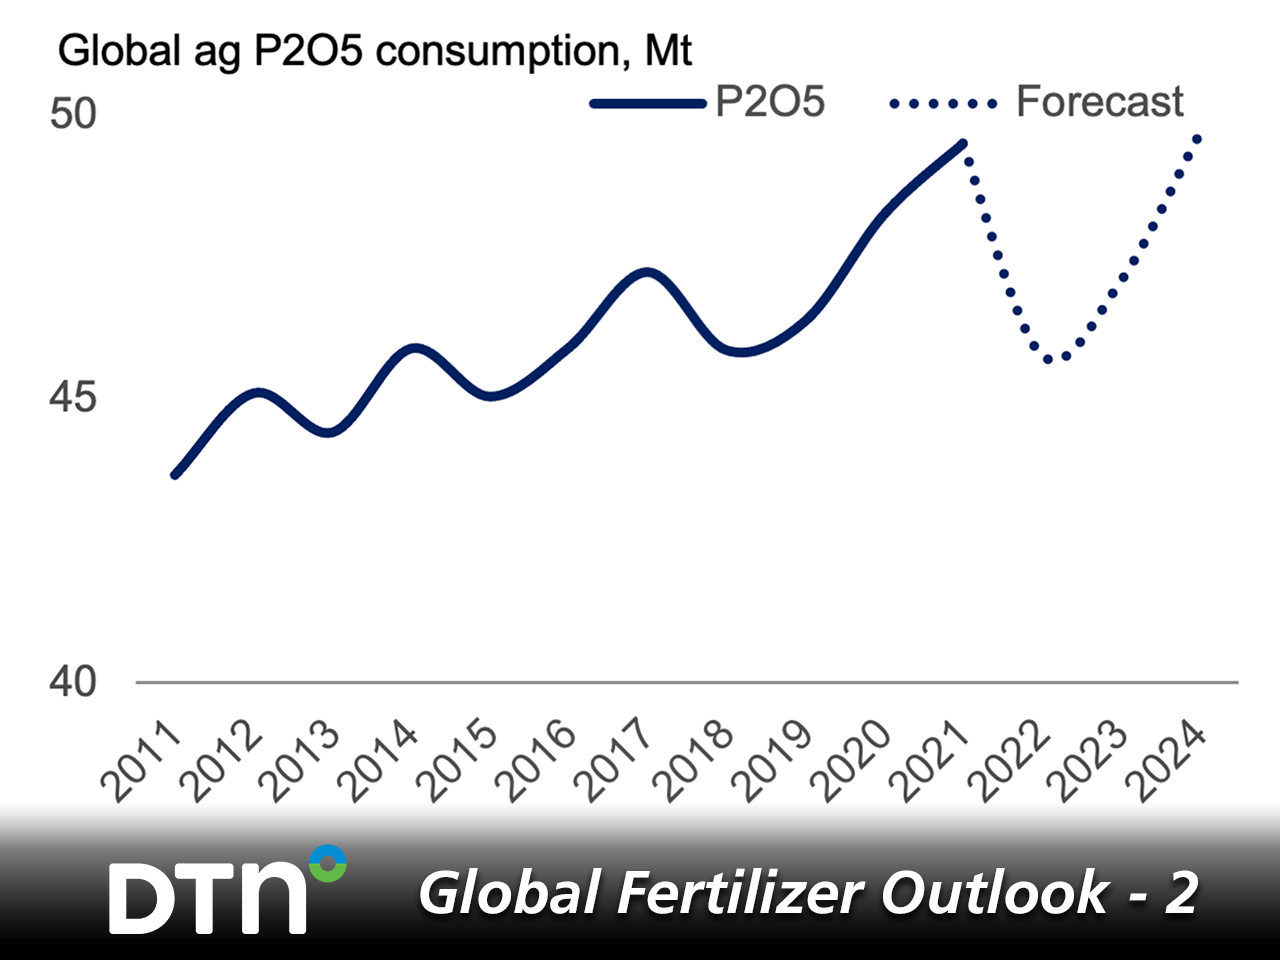 Demand destruction from record high phosphorus fertilizer prices was seen across the globe in 2022. Demand should rebound in 2023 and 2024, depending on fertilizer affordability. (CRU Graphic)